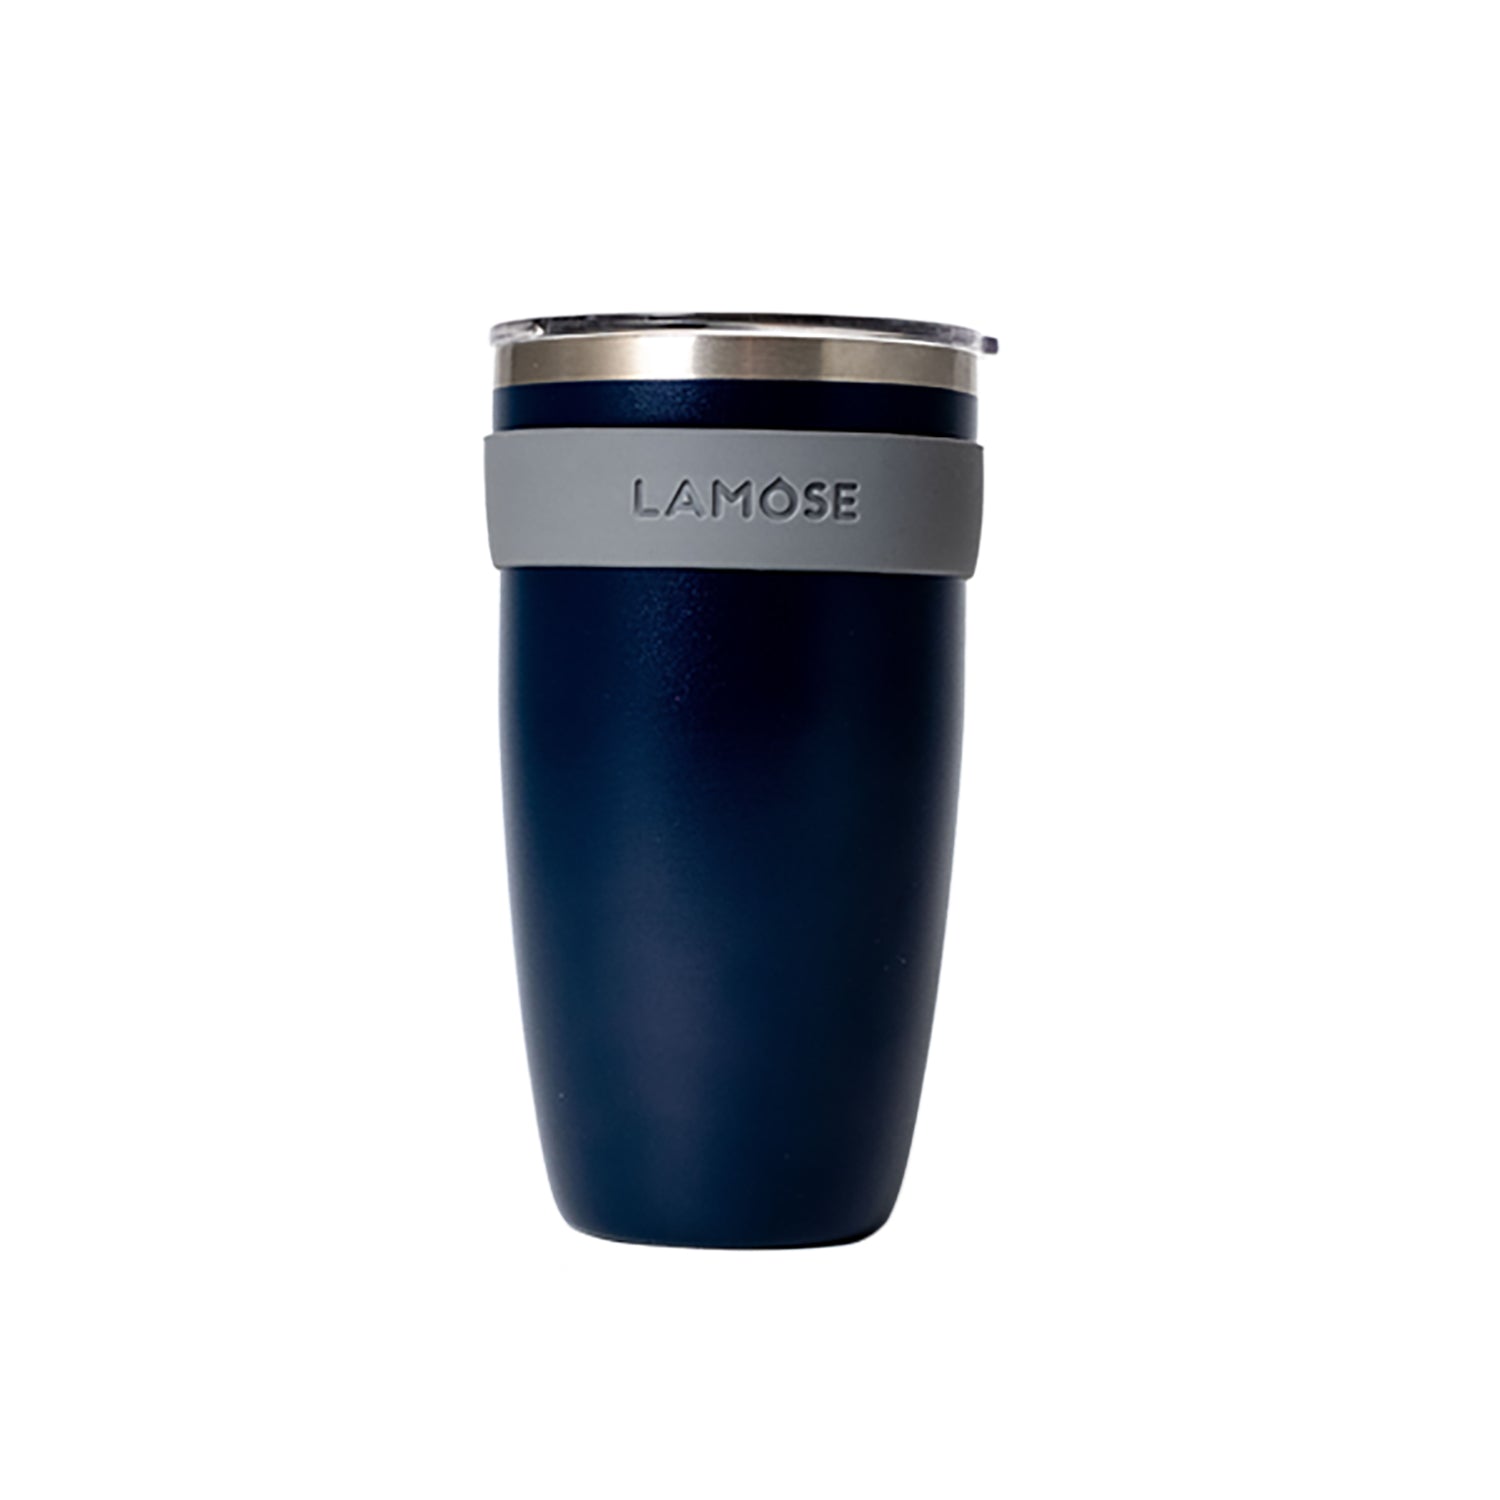 LAMOSE Peyto Sleeves - Custom fit for the Peyto 14oz bottle. Enhanced grip, color variety, durable design, easy maintenance. Stylish and practical, eco-friendly choice. Comfortable, fashionable, and versatile. Elevate your drinking experience today!